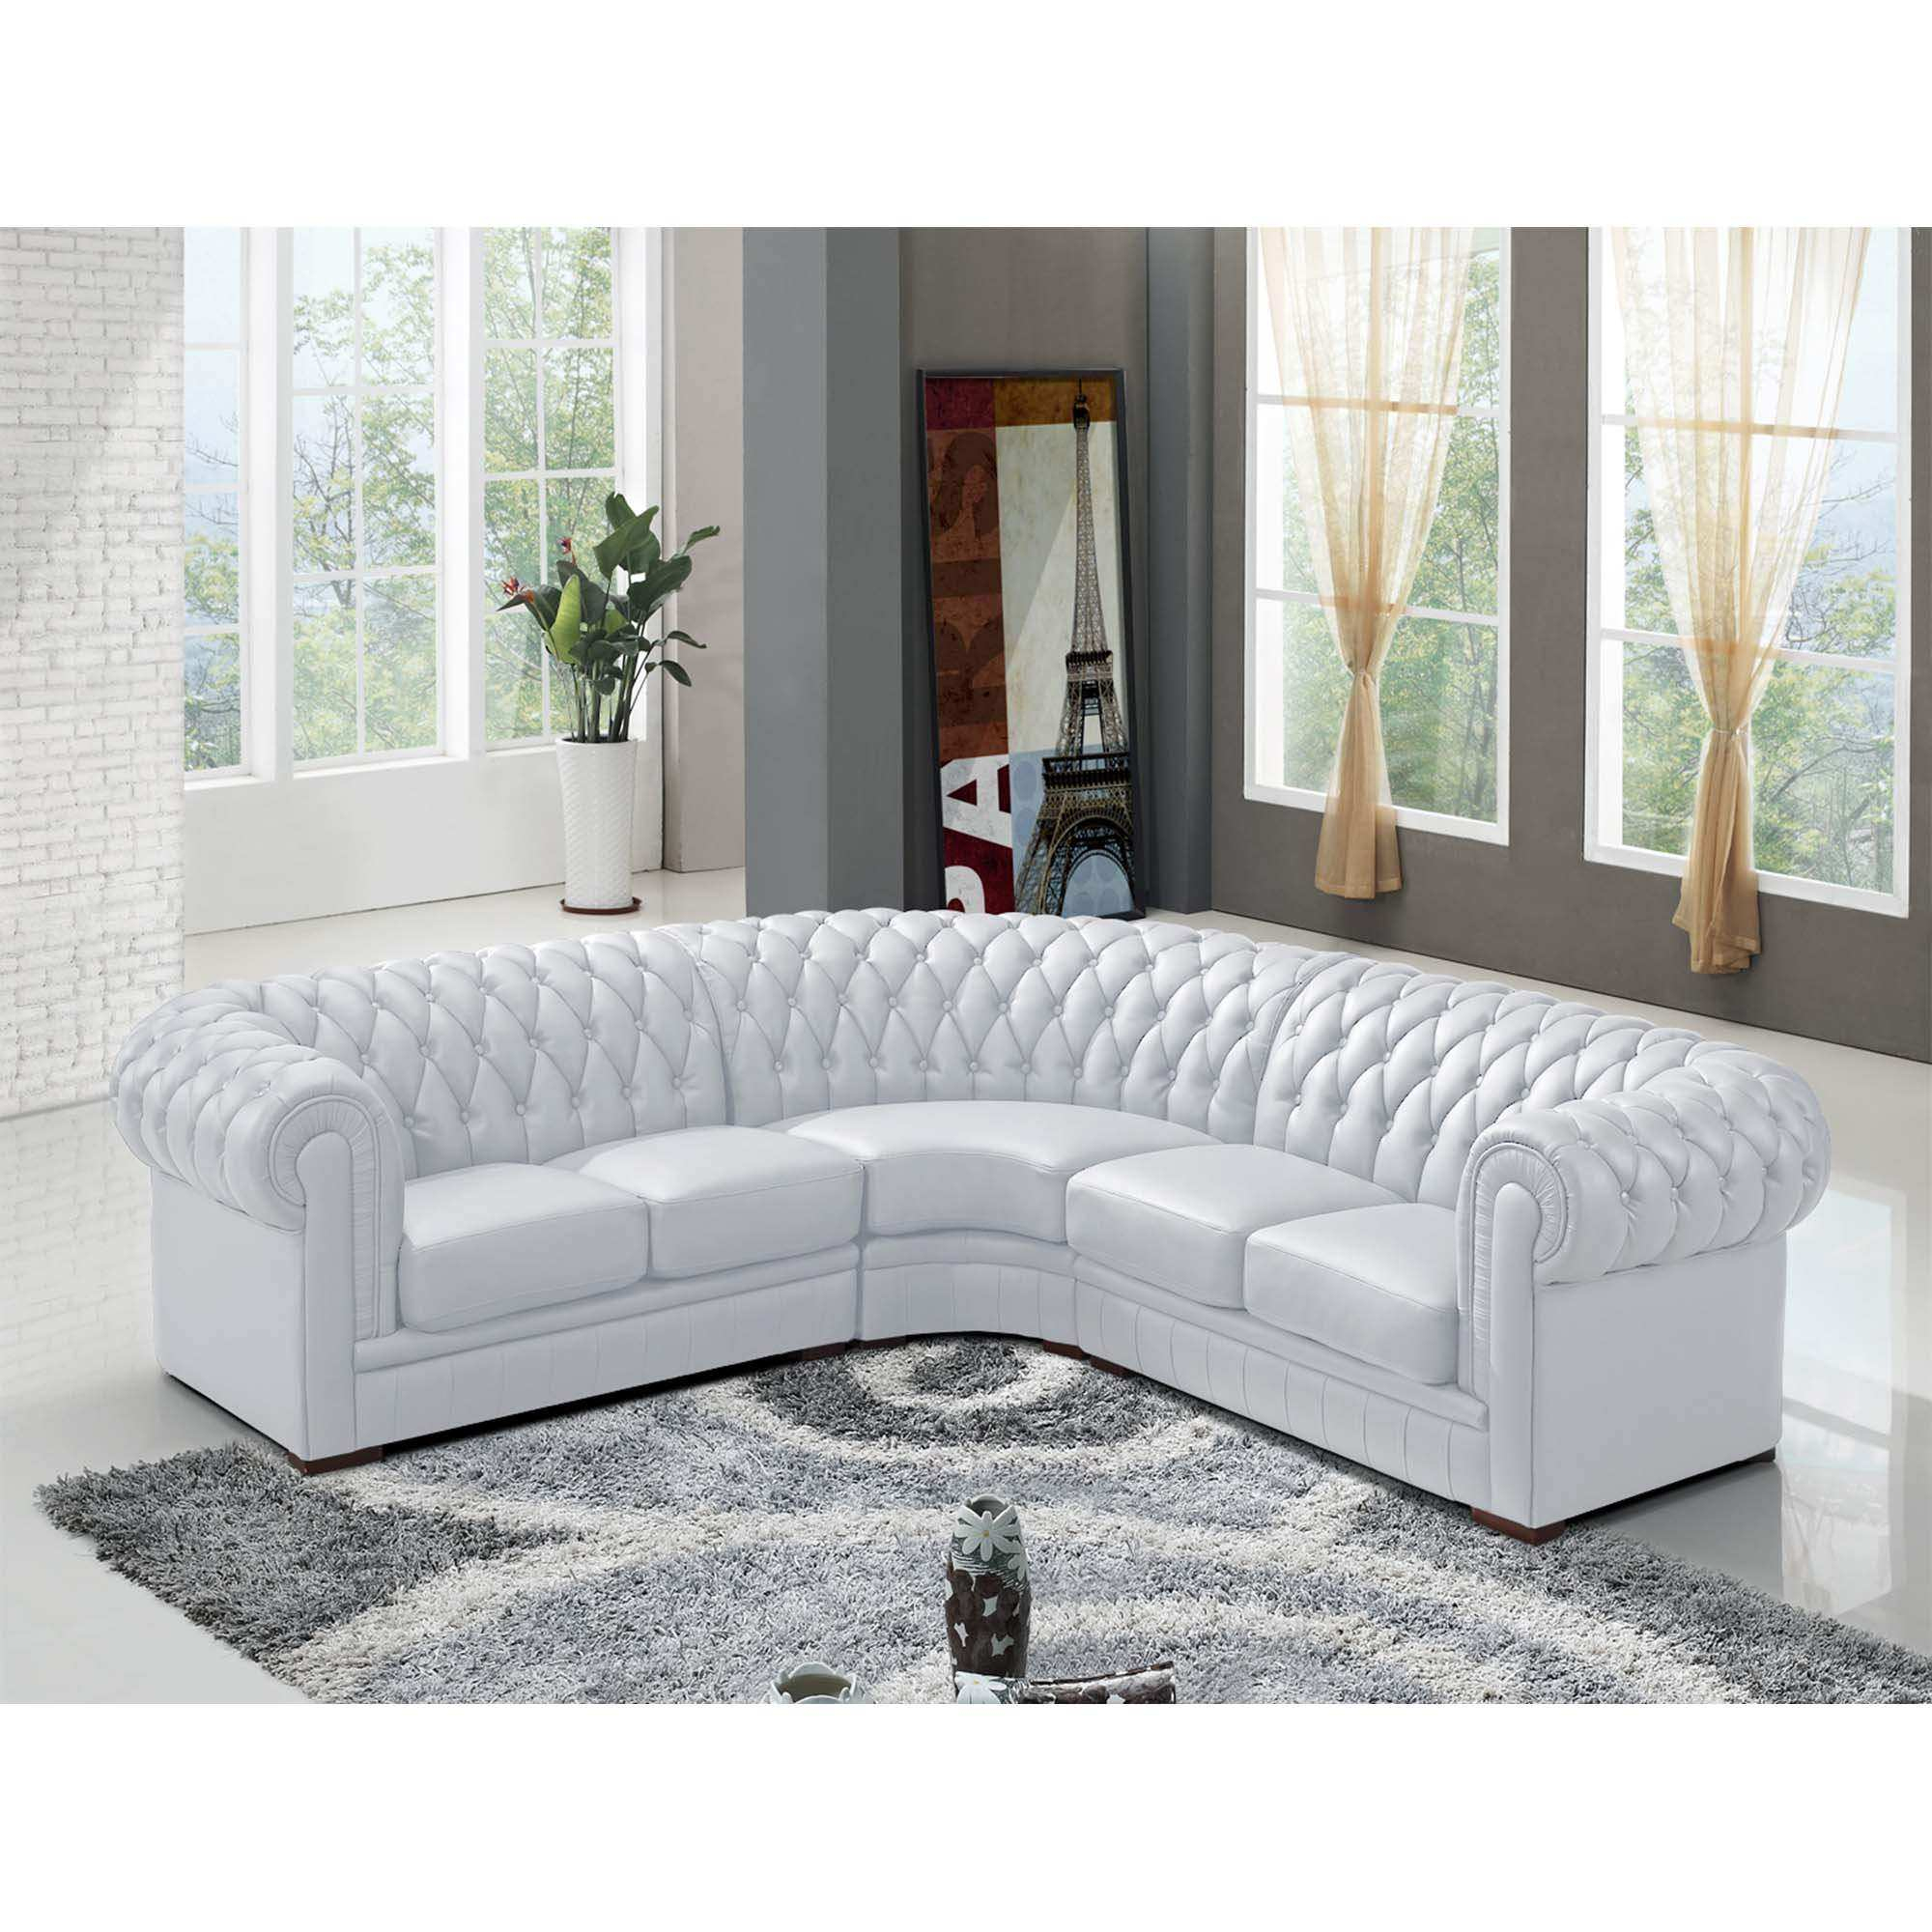 8_Canape D Angle Reversible Cuir Blanc Capitonne Chesterfield dedans Canape D Angle Cuir But